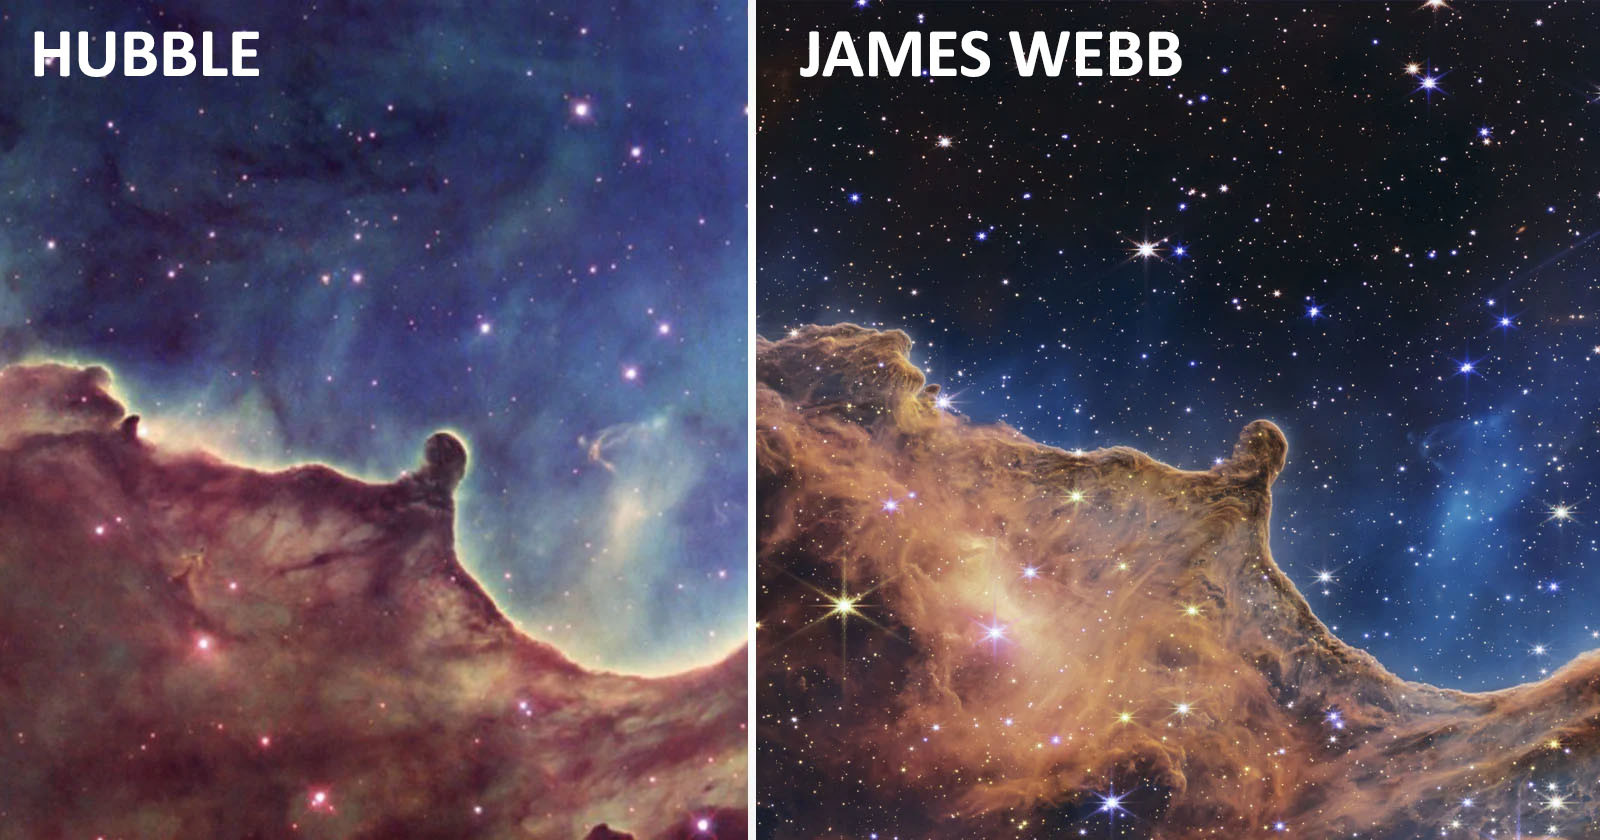 Comparing Webbs First Photos to What Hubble Saw